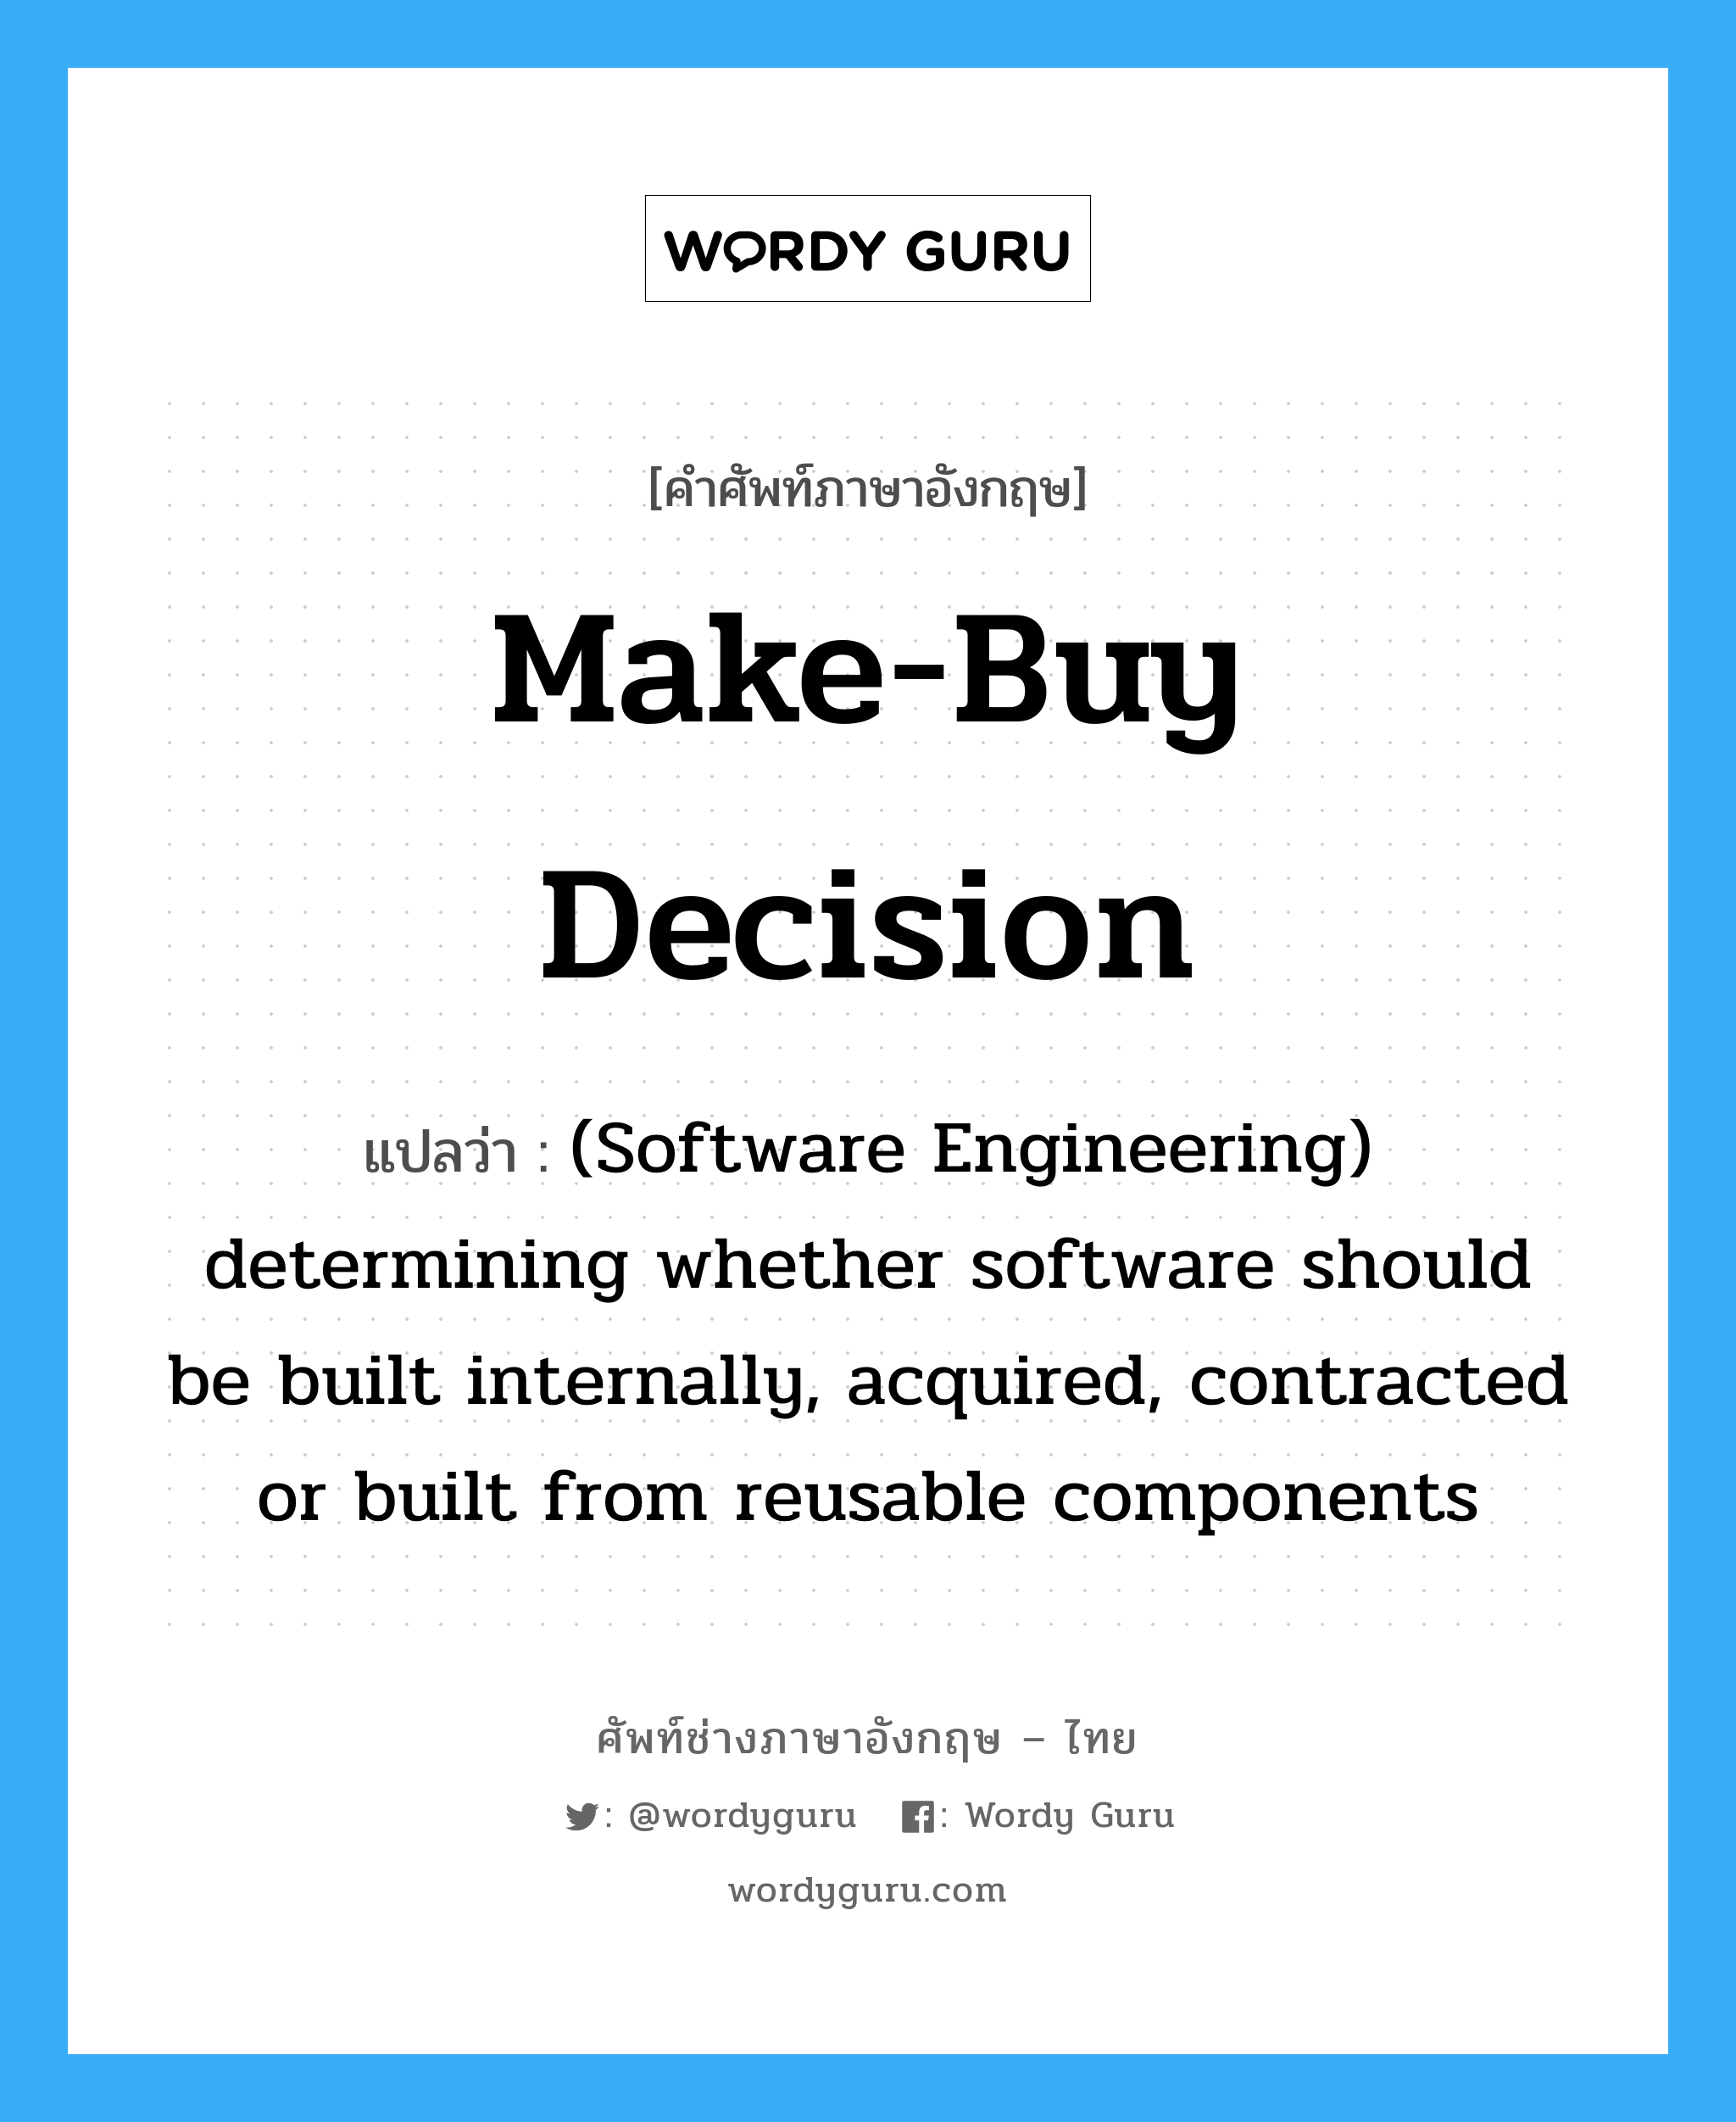 Make-buy decision แปลว่า?, คำศัพท์ช่างภาษาอังกฤษ - ไทย Make-buy decision คำศัพท์ภาษาอังกฤษ Make-buy decision แปลว่า (Software Engineering) determining whether software should be built internally, acquired, contracted or built from reusable components